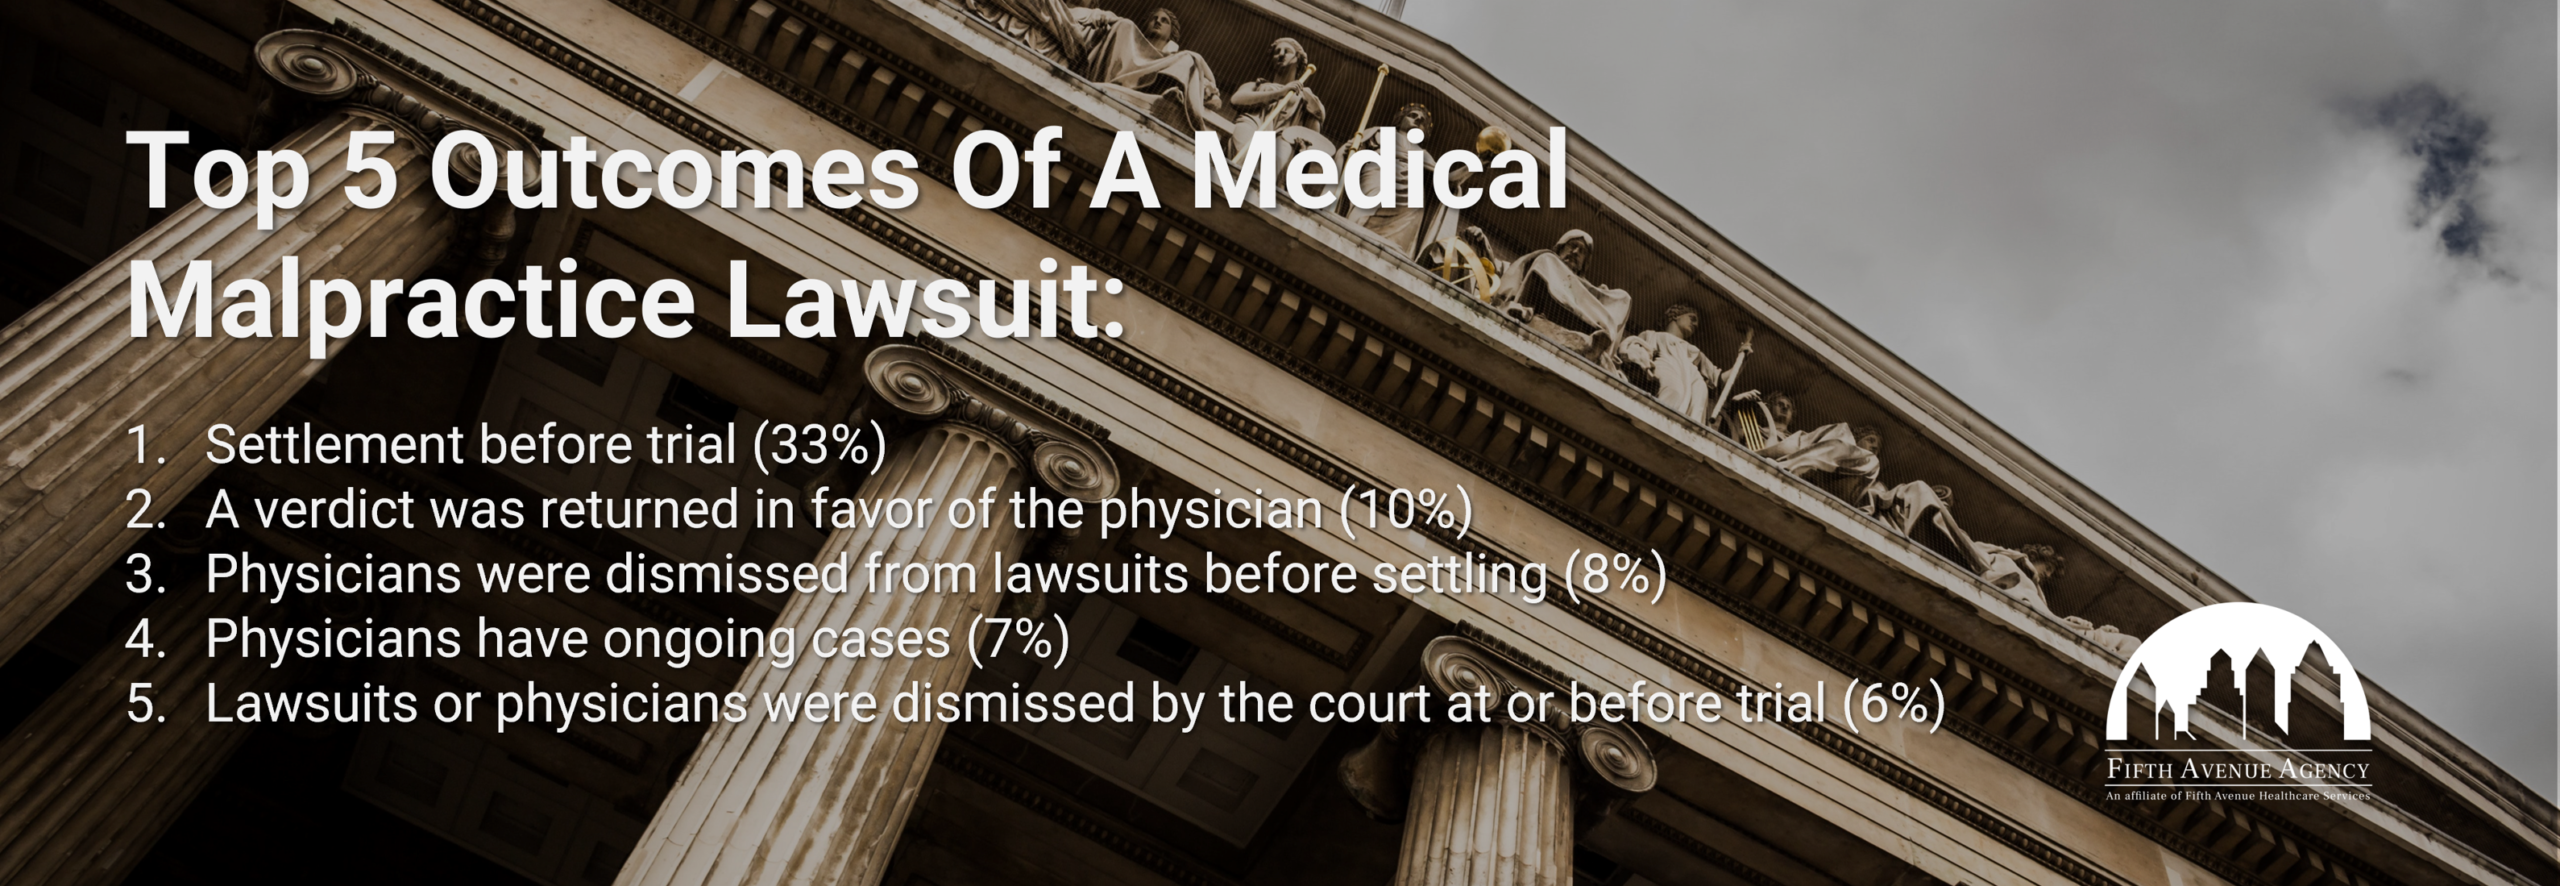 Top 5 Outcomes Of Medical Malpractice Lawsuits